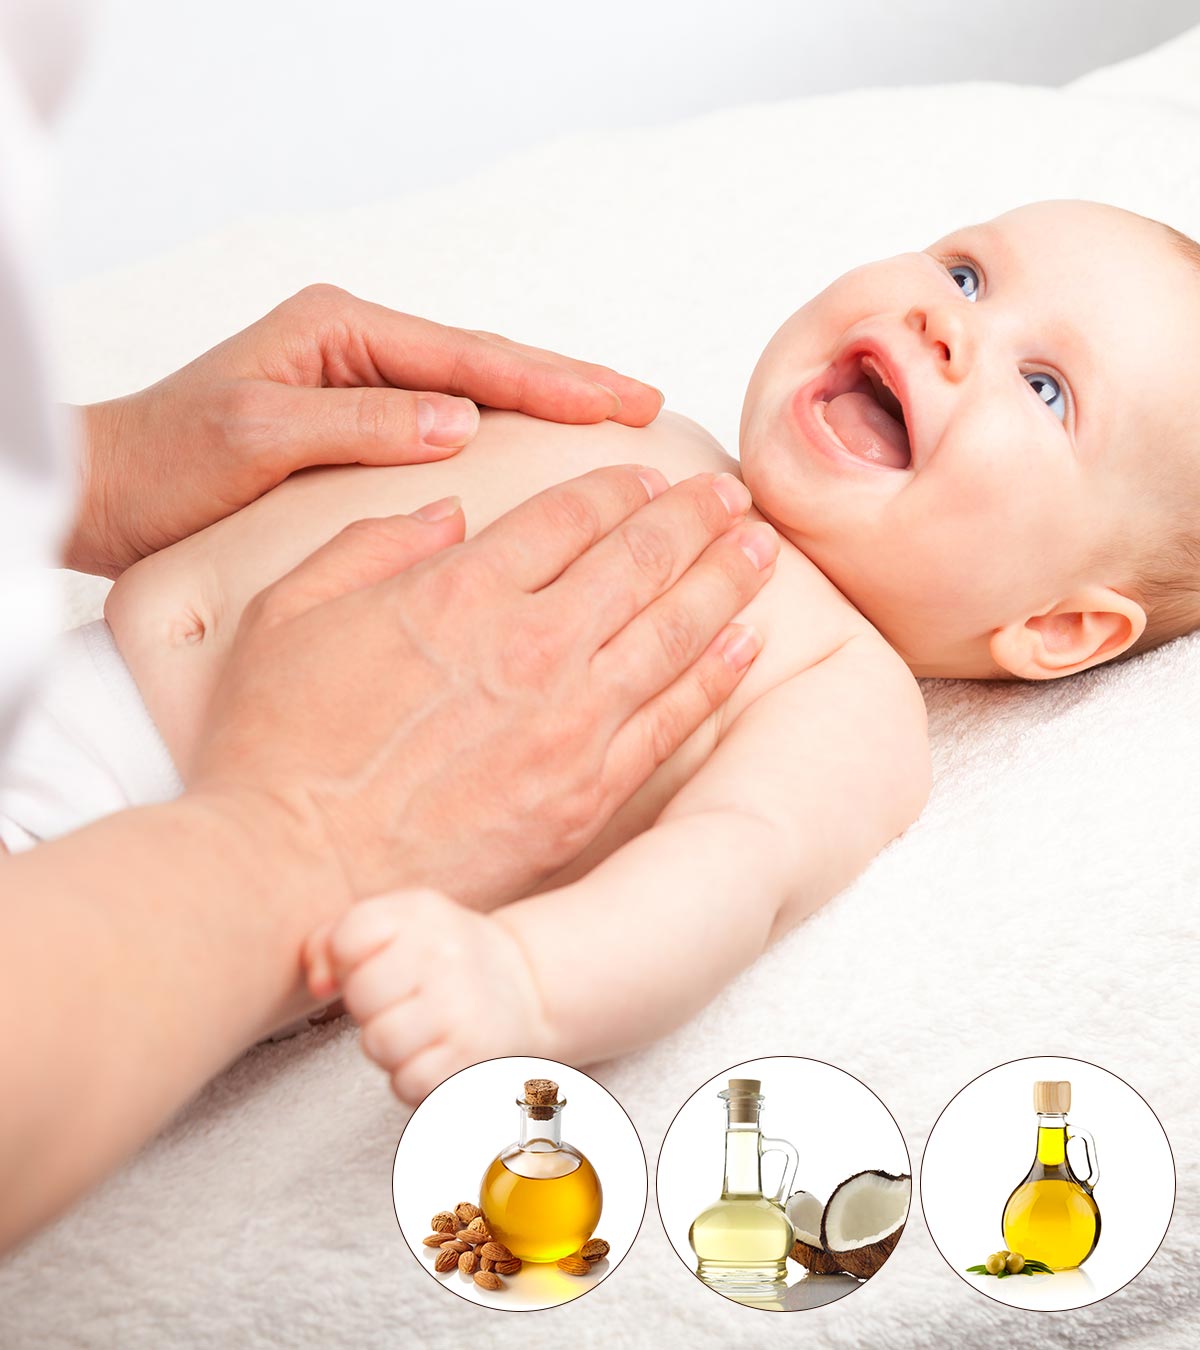 Top Baby Massage Oils: Know What's Best For Your Baby?